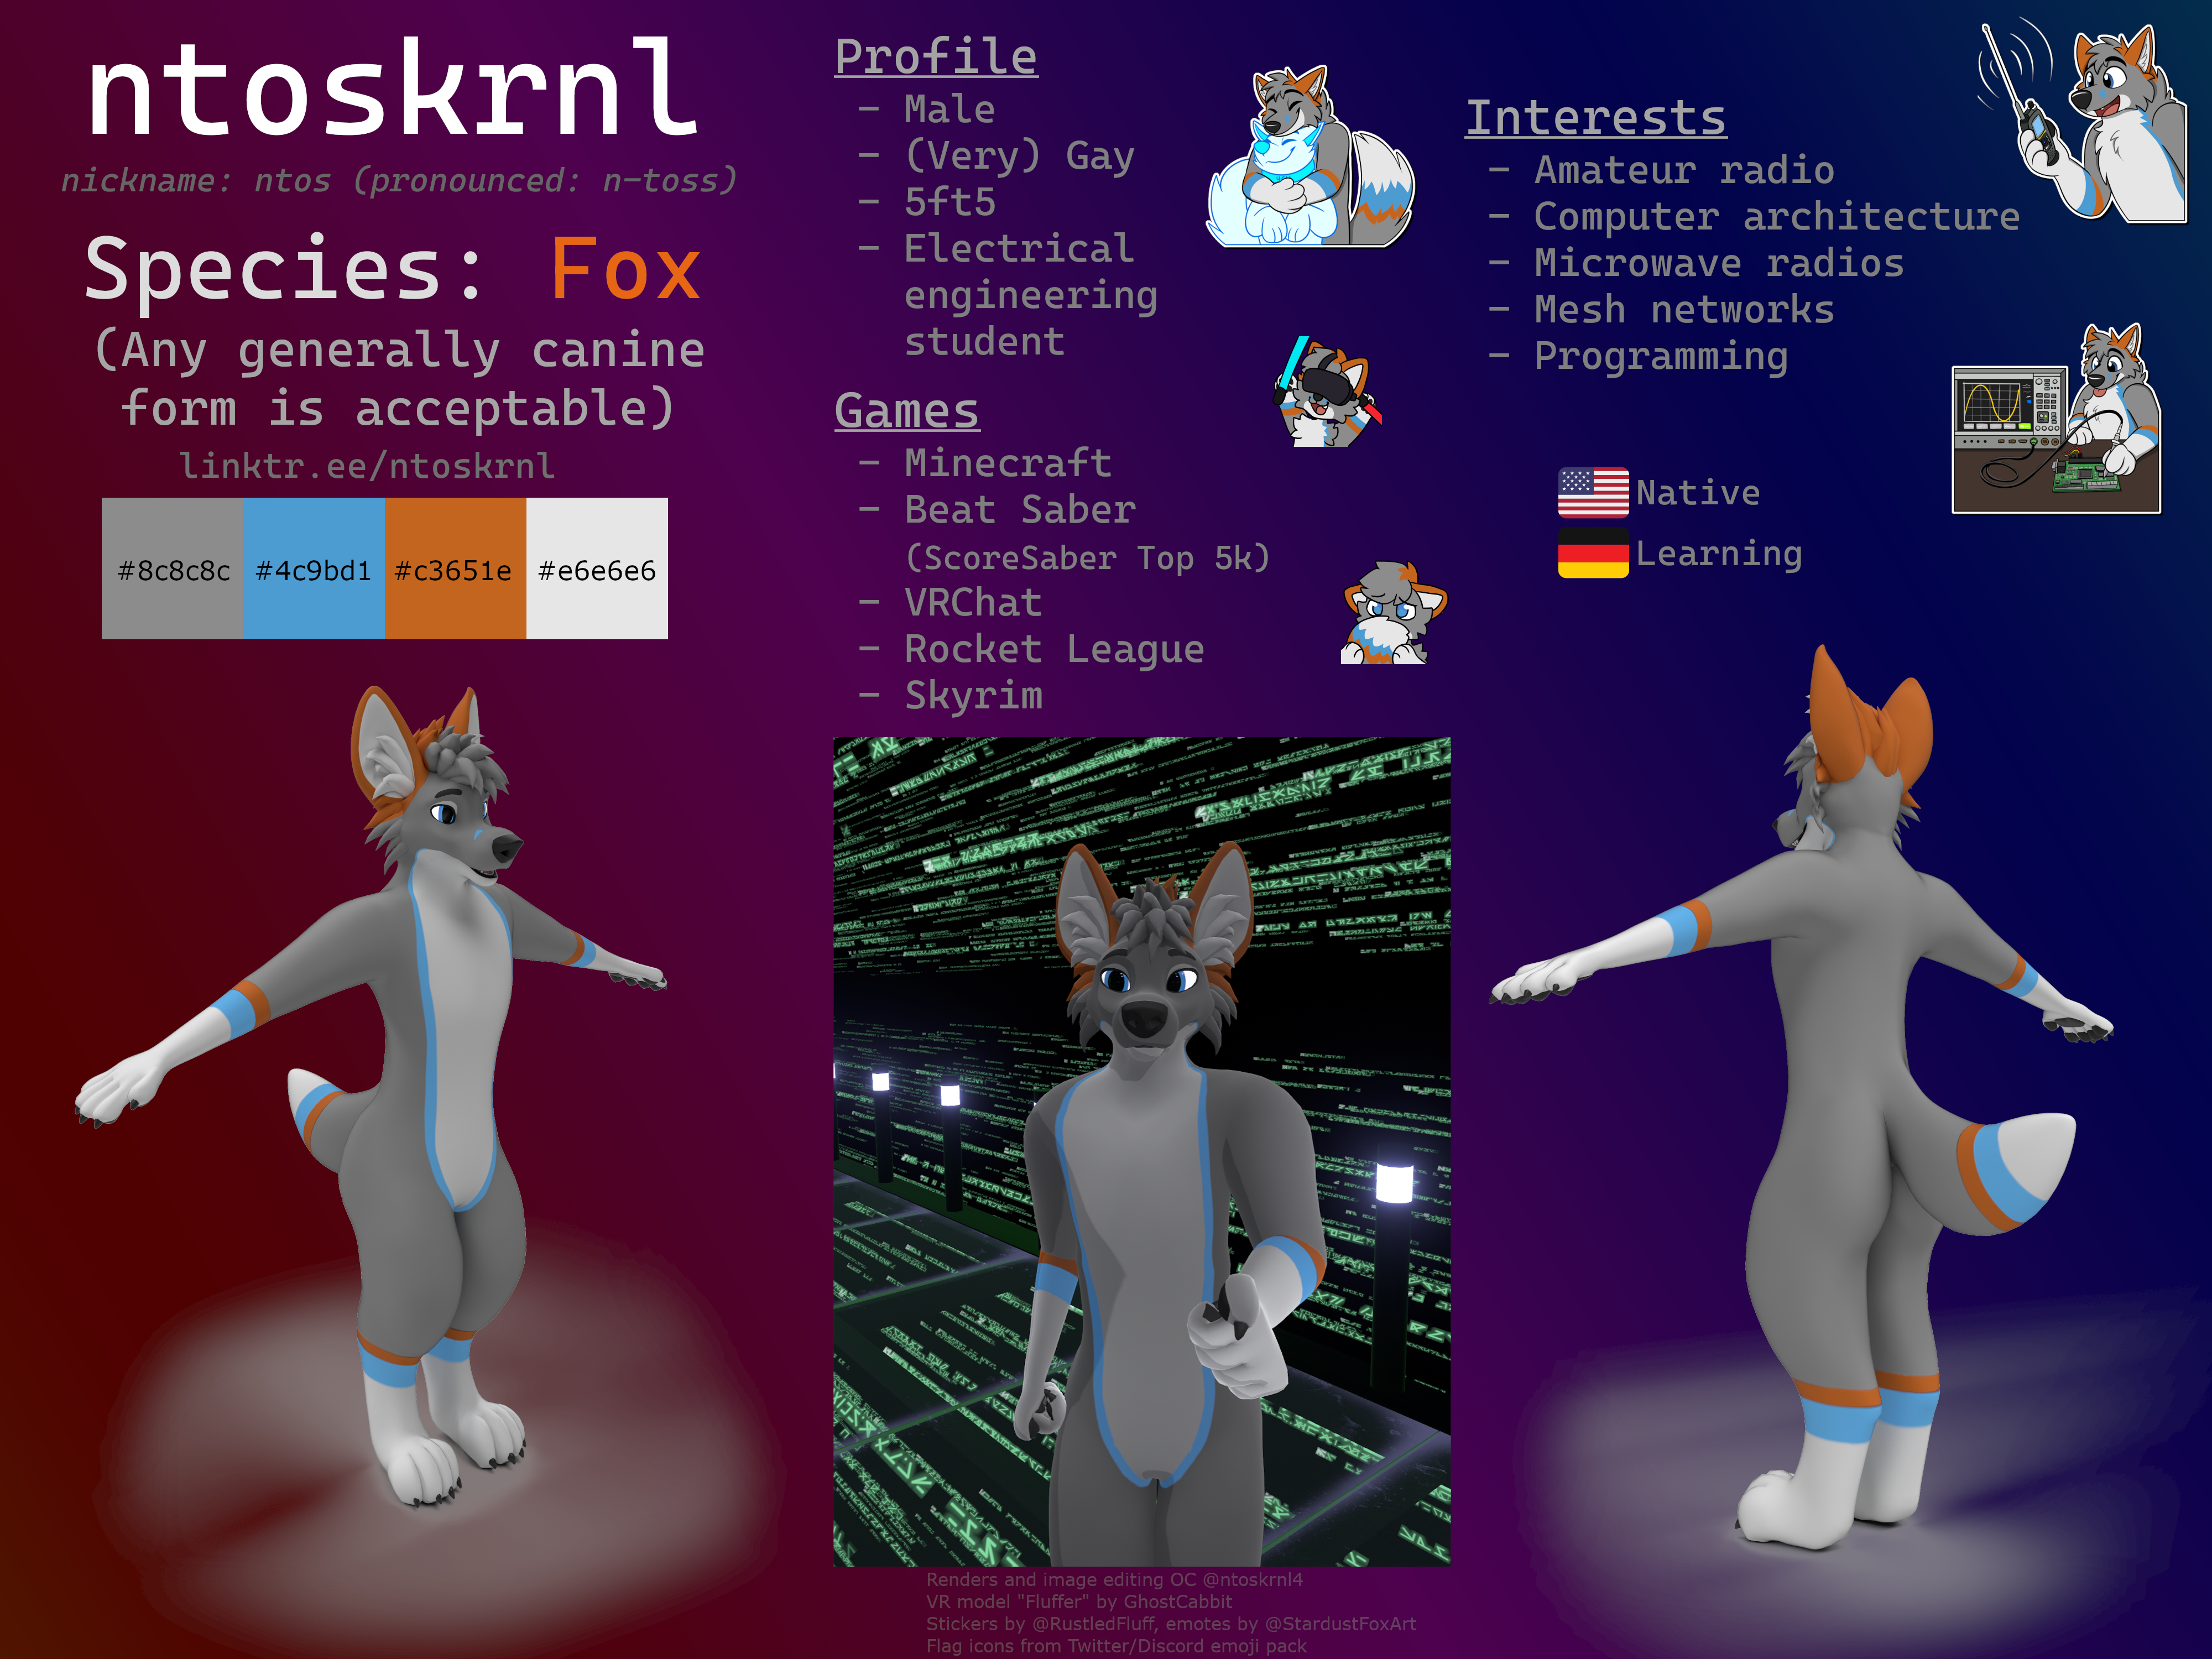 A furry reference
sheet for "ntoskrnl". He is a mostly grey fox, with a white belly and extremities, and blue and orange on the seam
between the grey and white. He is male, very gay, 5 foot 5 inches or 165 centimeters, and an electrical engineer. 
Games he play include Minecraft, Beat Saber, and VRChat. Interests include amateur radio, computer architecture, 
microwave radios, mesh networks, and programming. Ntos speaks English natively, and is learning German.